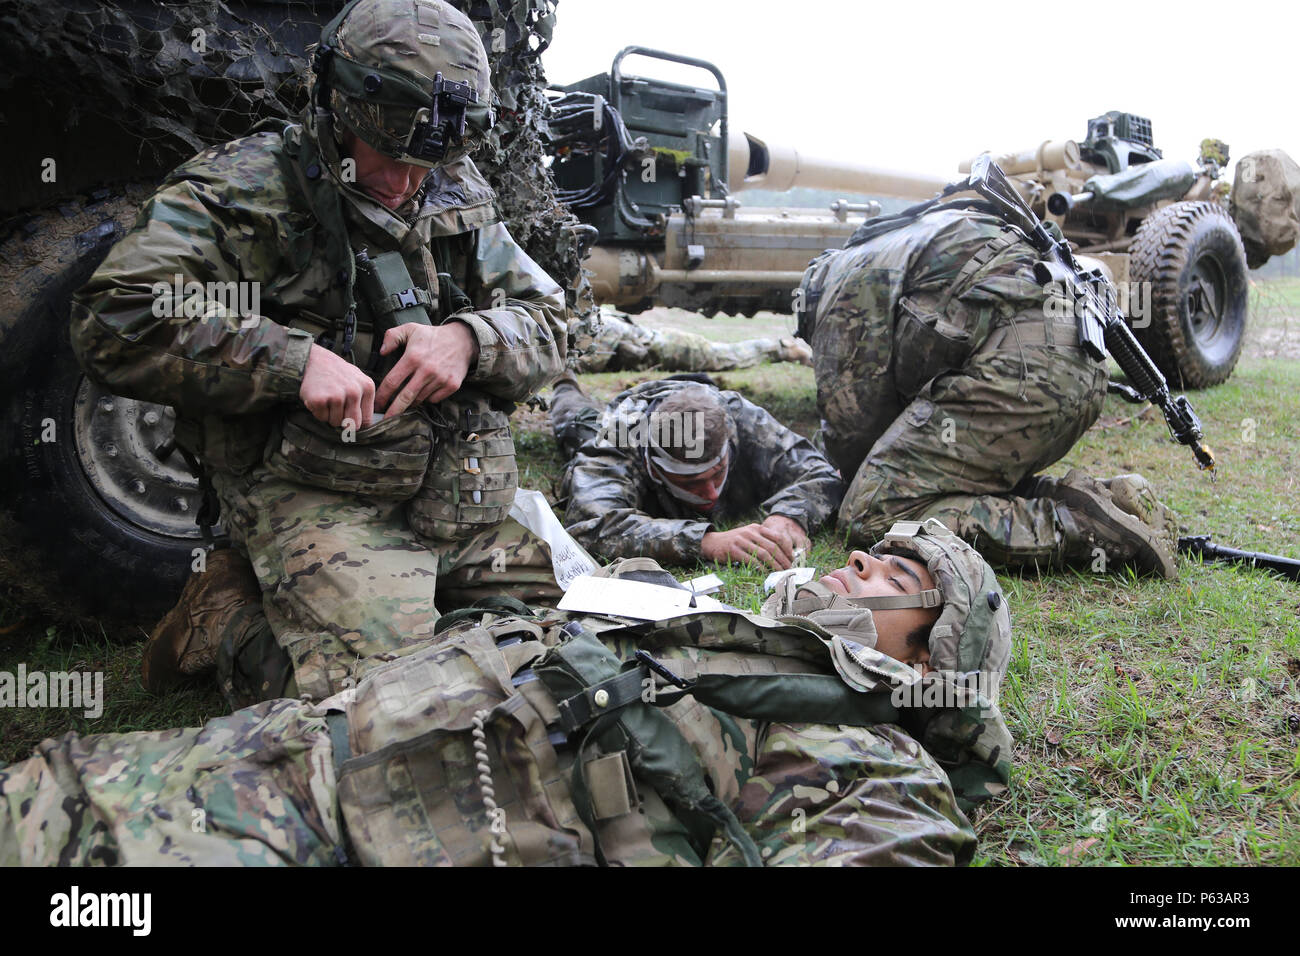 U.S. Soldiers of Alpha Company, 4th Battalion, 319th Airborne Field Artillery Regiment, 173rd Airborne Brigade provide medical aid to simulated casualties during exercise Saber Junction 16 at the U.S. Army’s Joint Multinational Readiness Center (JMRC) in Hohenfels, Germany, April 15, 2016. Saber Junction 16 is the U.S. Army Europe’s 173rd Airborne Brigade’s combat training center certification exercise, taking place at the JMRC in Hohenfels, Germany, Mar. 31-Apr. 24, 2016.  The exercise is designed to evaluate the readiness of the Army’s Europe-based combat brigades to conduct unified land ope Stock Photo